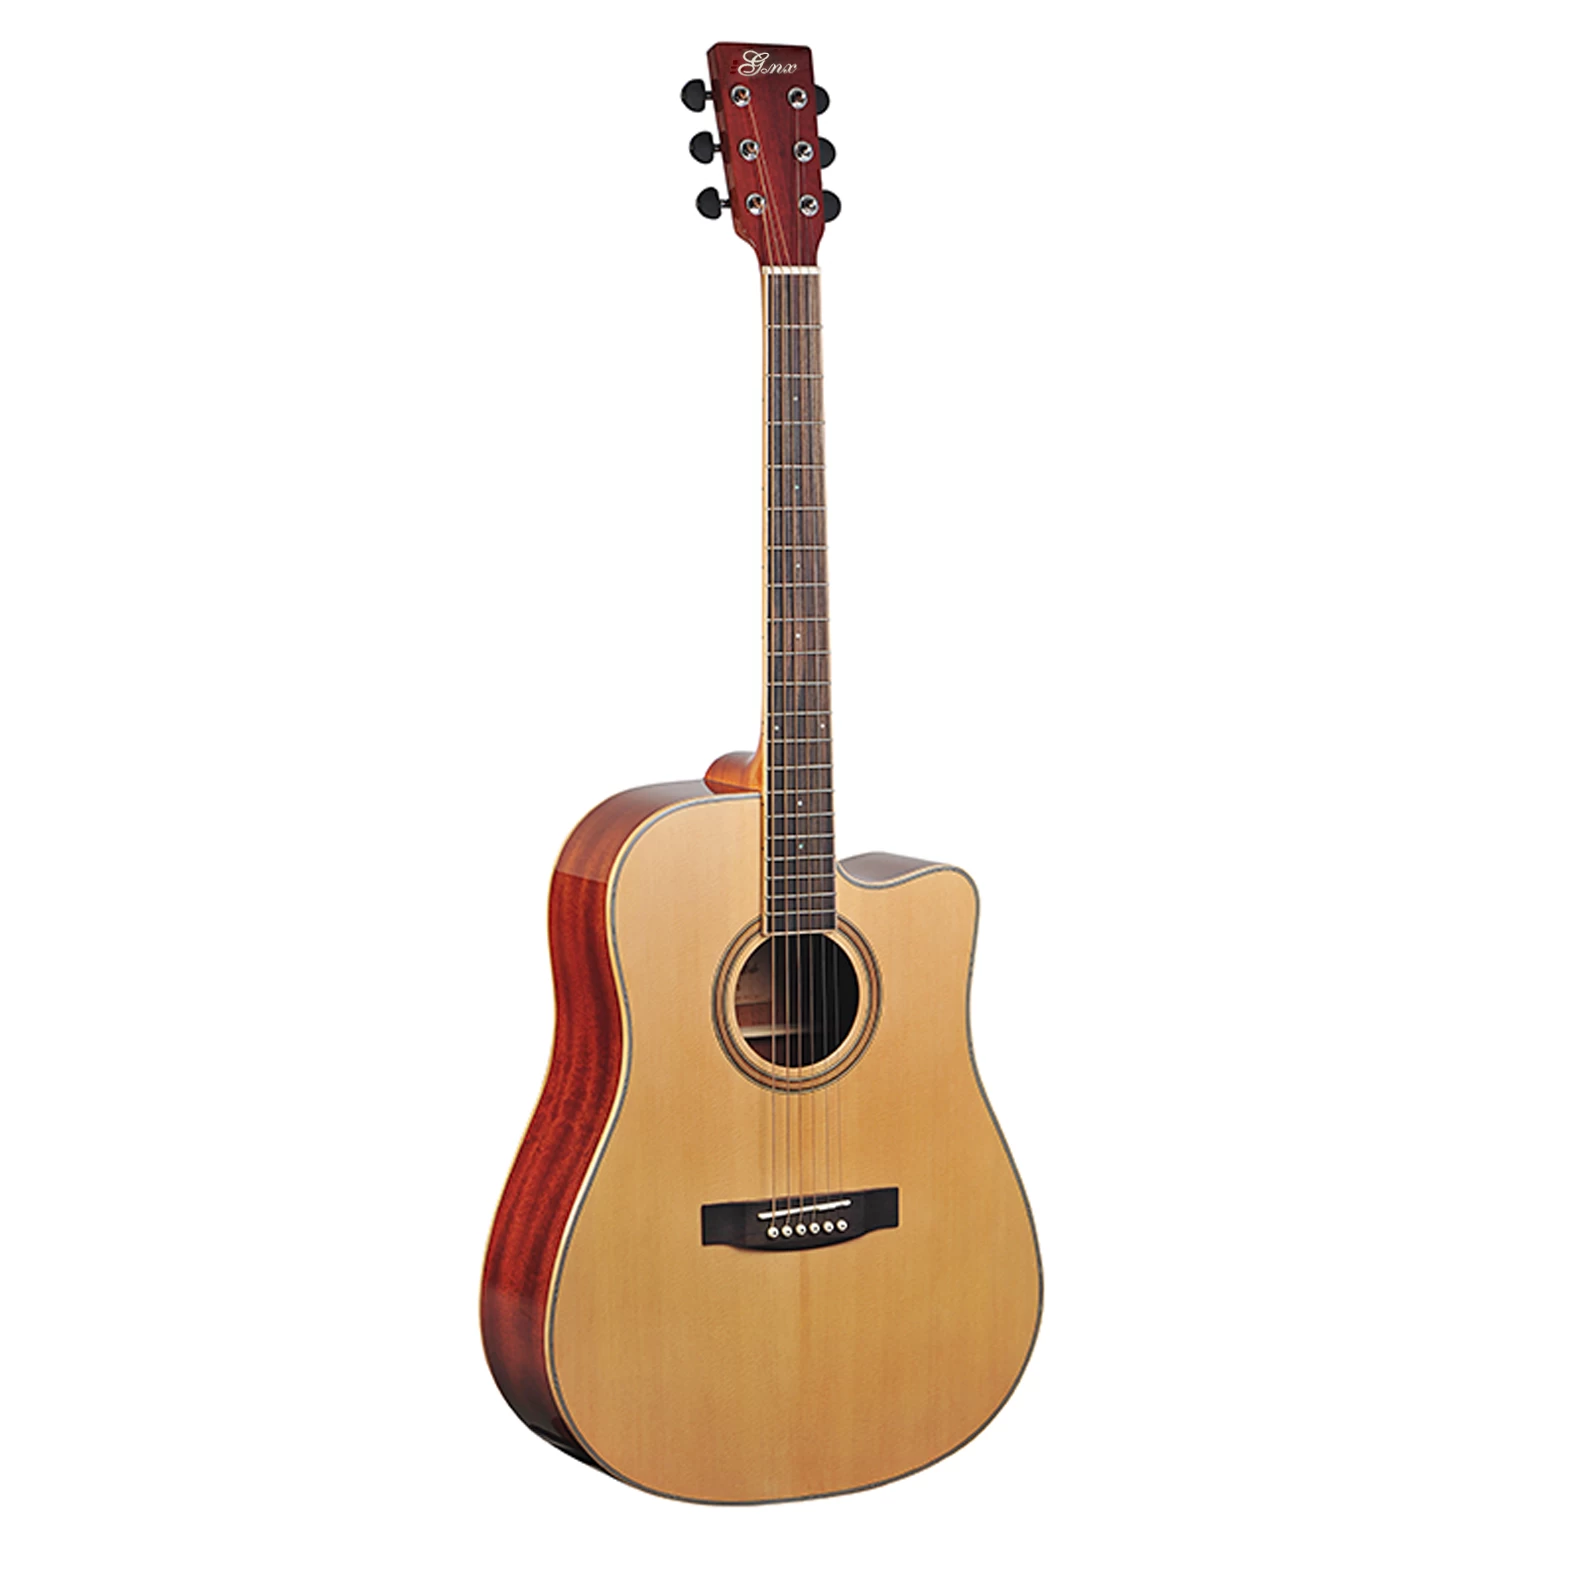 Rotas 41 inch acoustic electric spruce wood guitar ZA-S418D